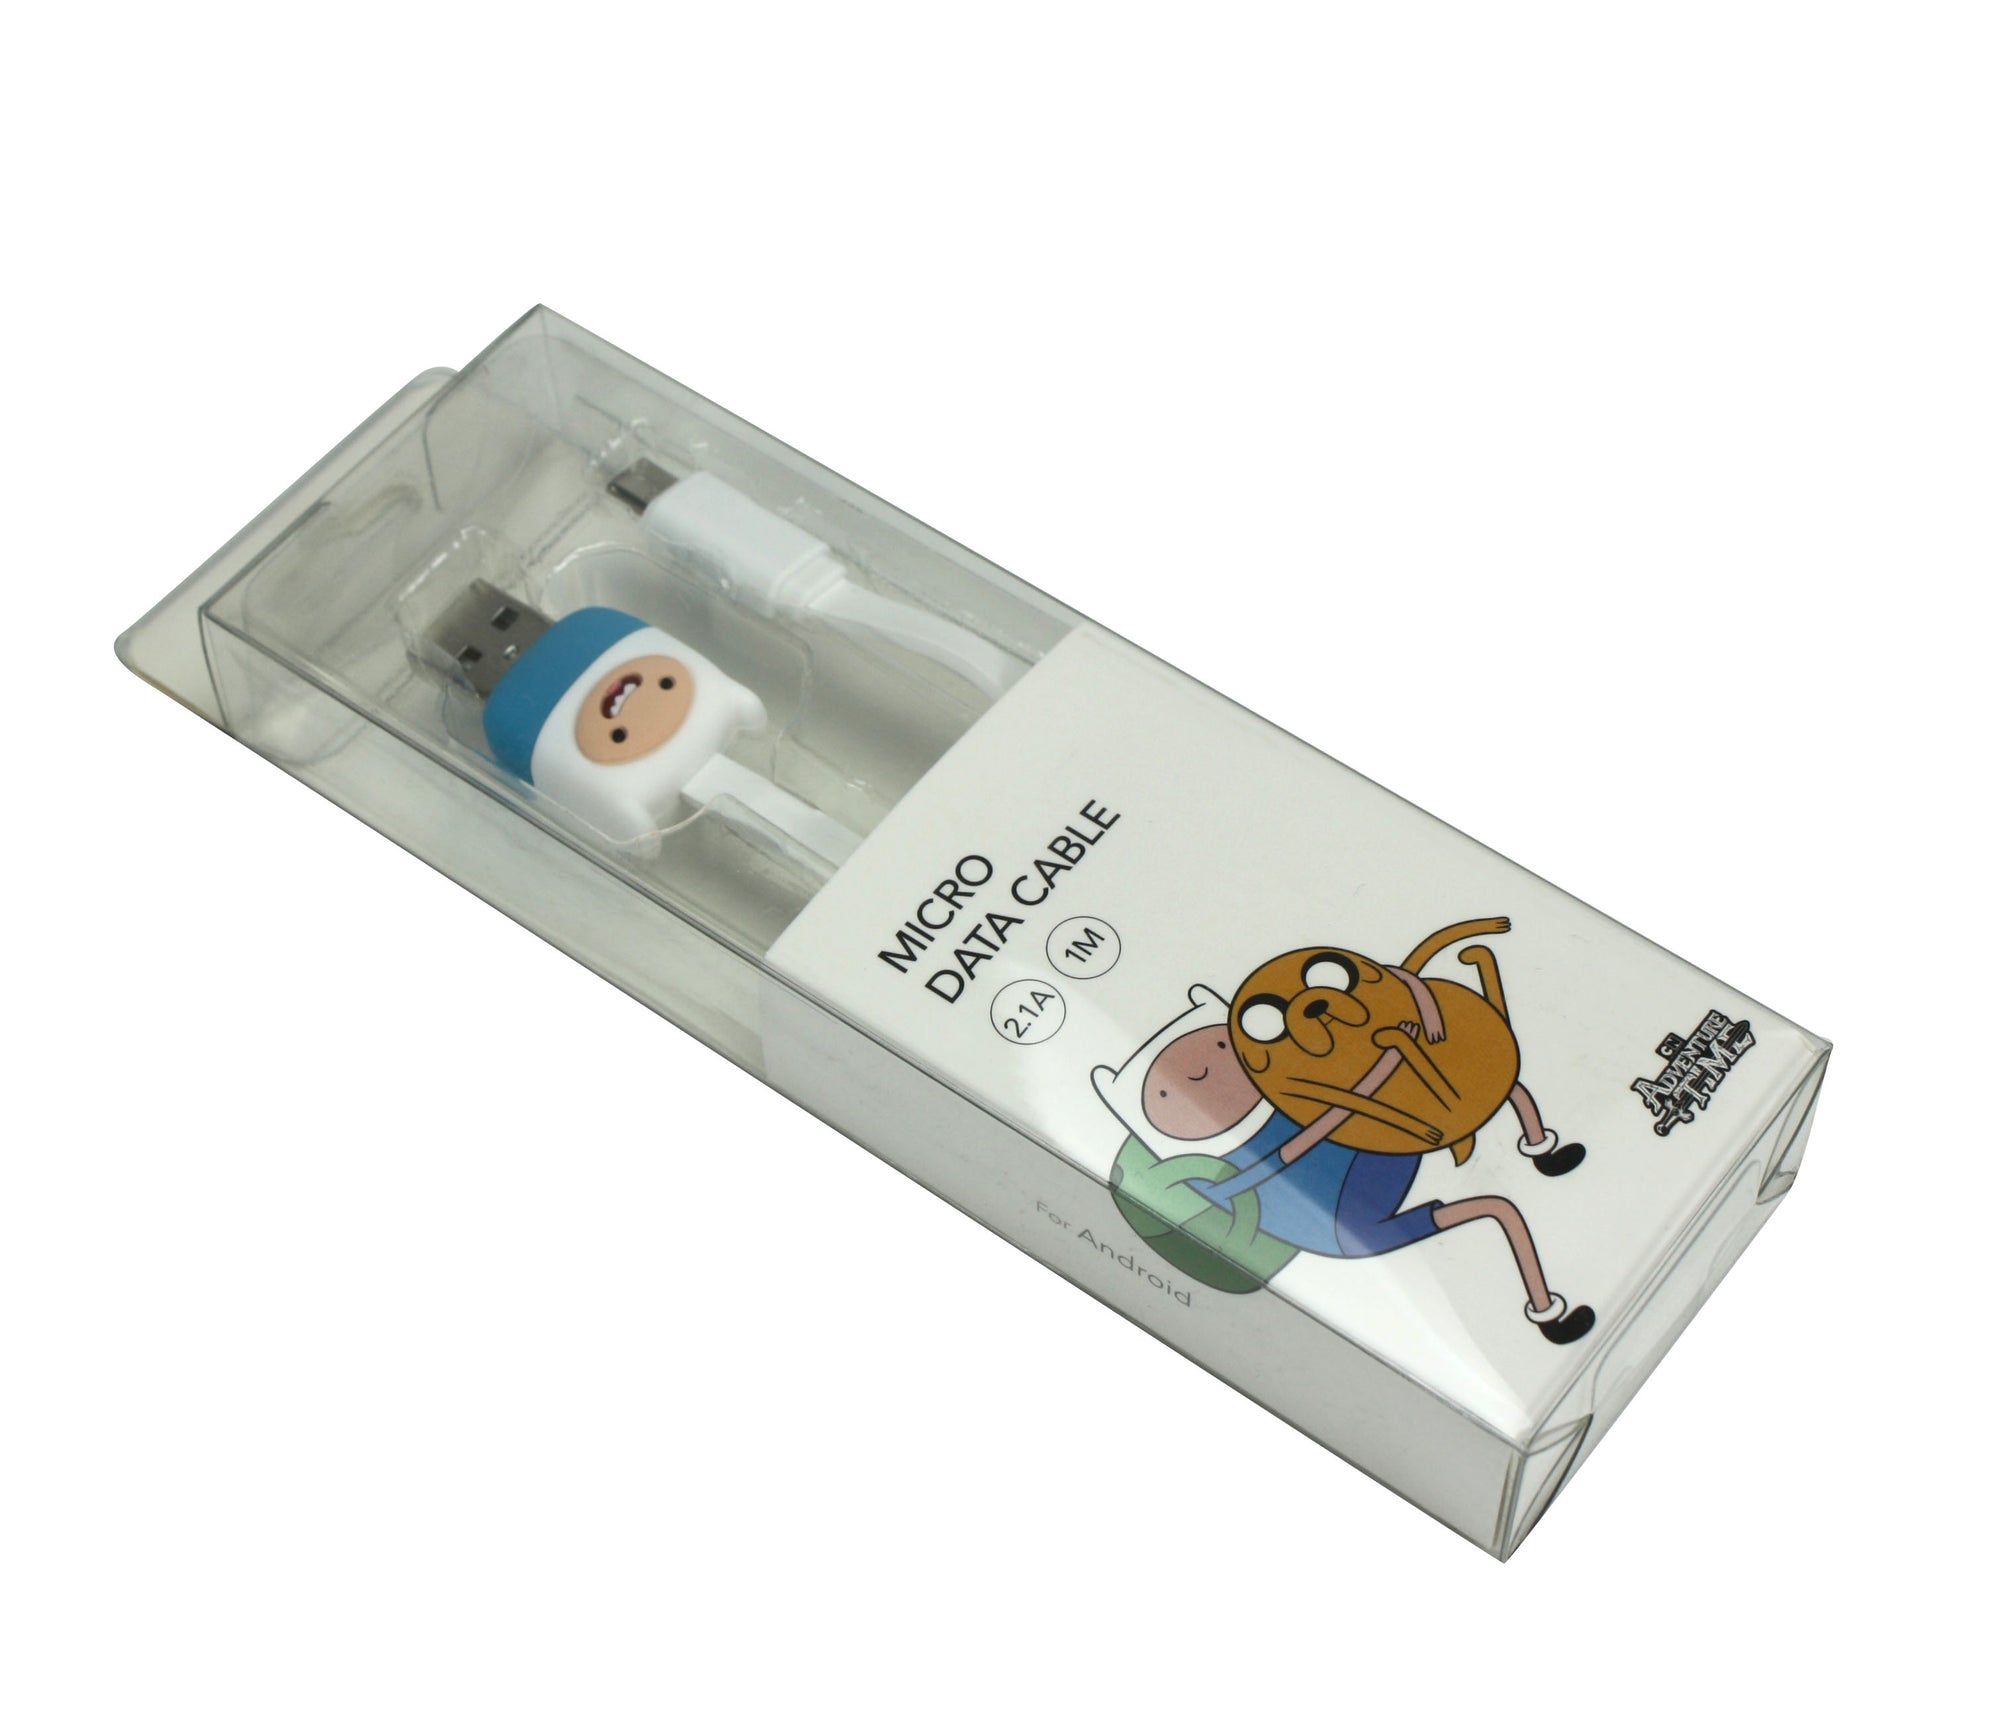 Adventure Time Finn Micro Data Cable for Android, USB Charging Cable - farangshop-co